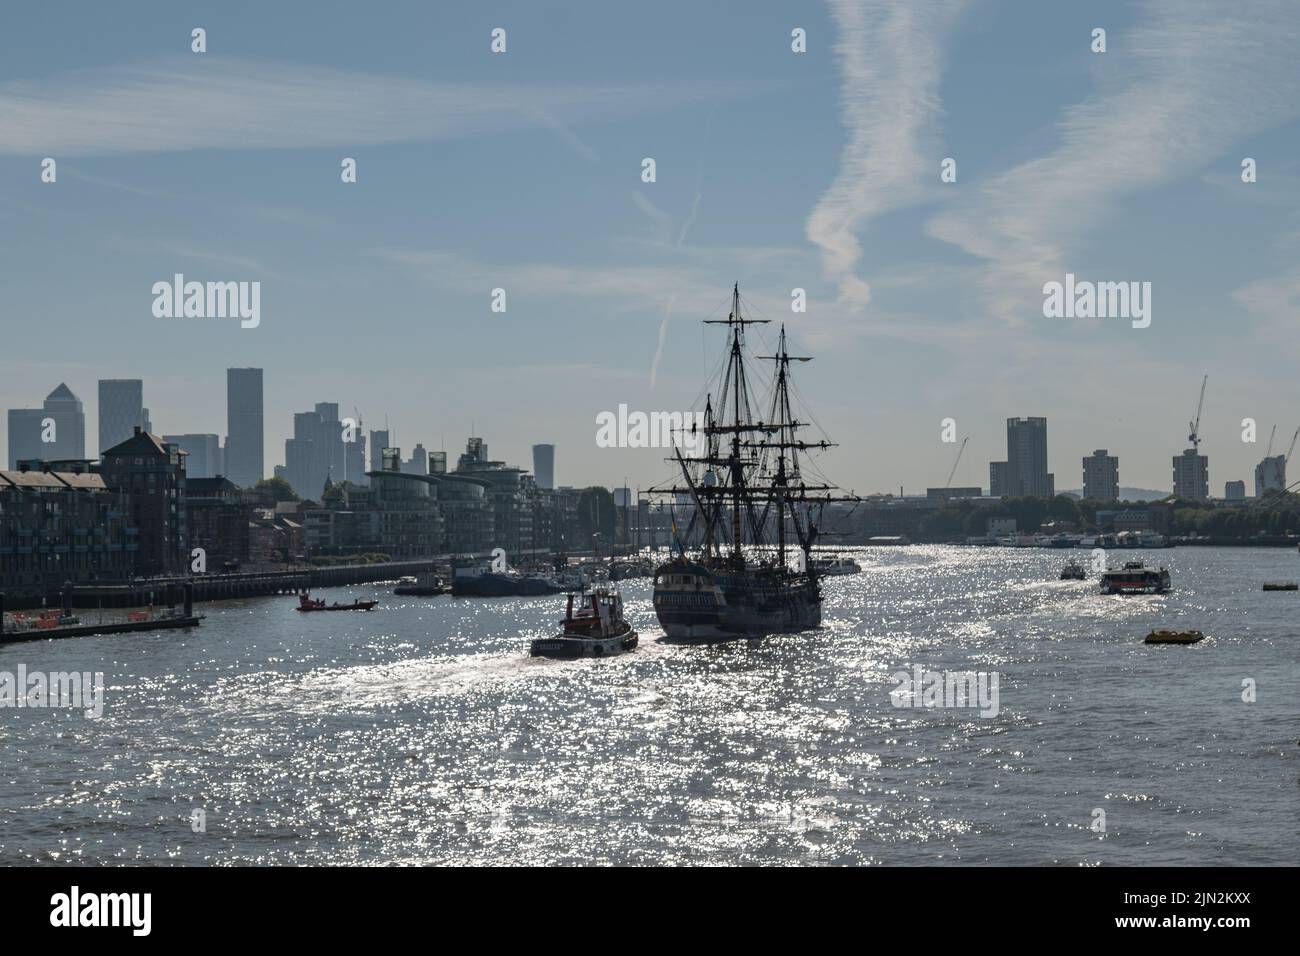 Tall ship Götheborg of Sweden makes way towards her berth in South Dock, Canary Wharf after passing through Tower Bridge, escorted by tug Christine. Stock Photo